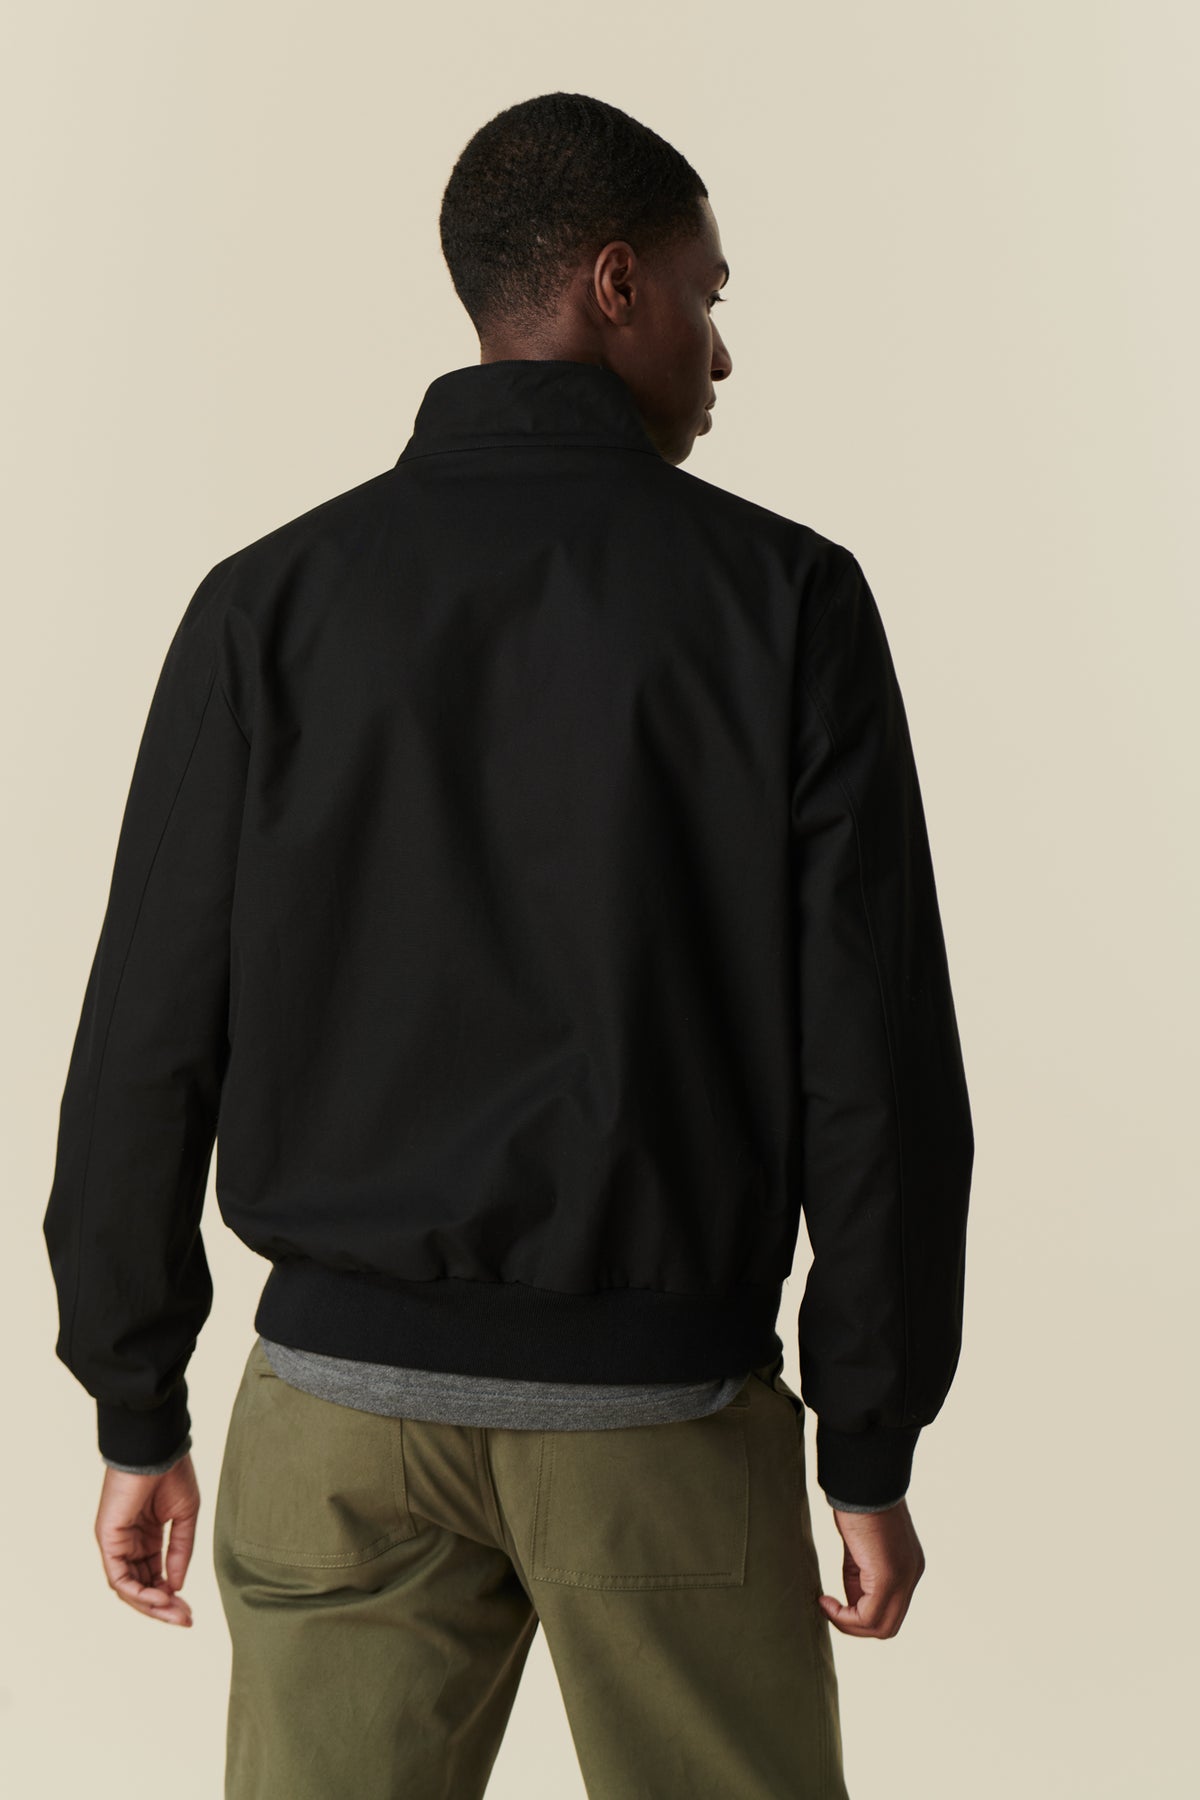 
            Back of black male wearing black Harrington jacket paired with olive combat trousers.